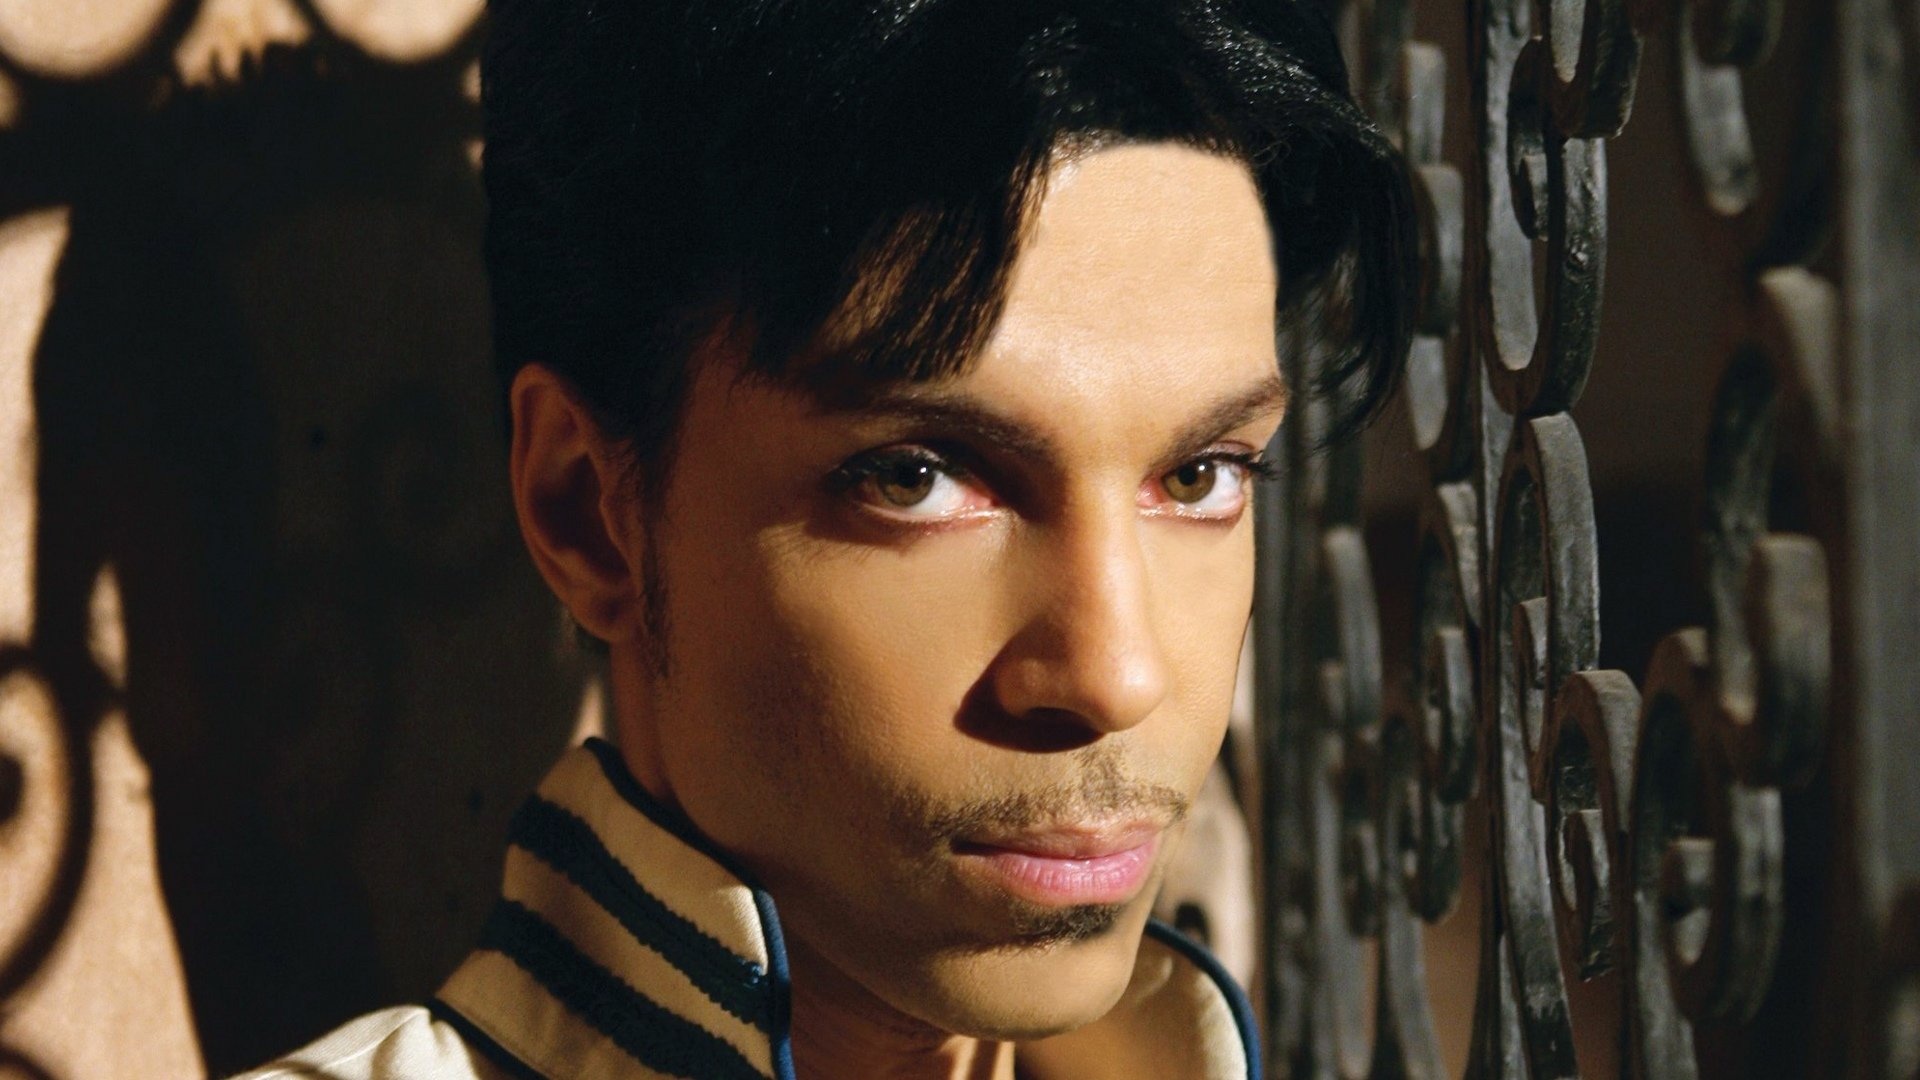 Prince, HD wallpapers, Backgrounds, Prince's music, 1920x1080 Full HD Desktop